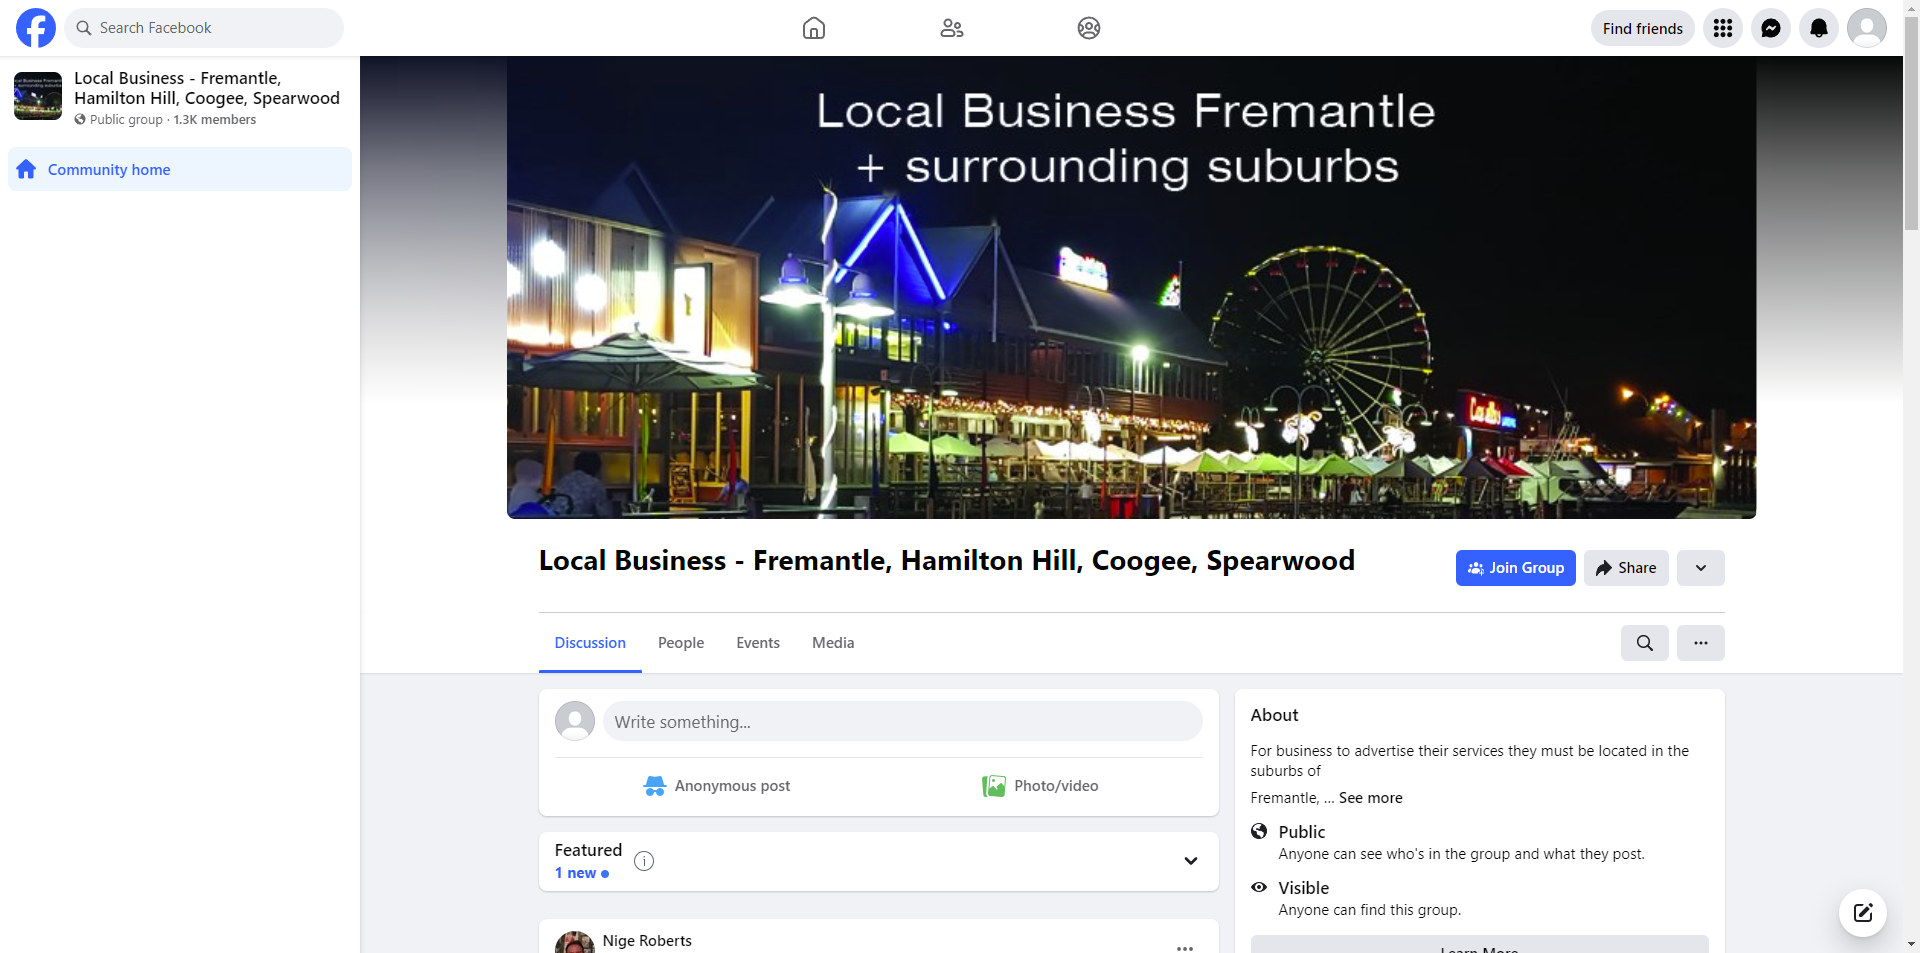 Local Business - Fremantle, Hamilton Hill, Coogee, Spearwood